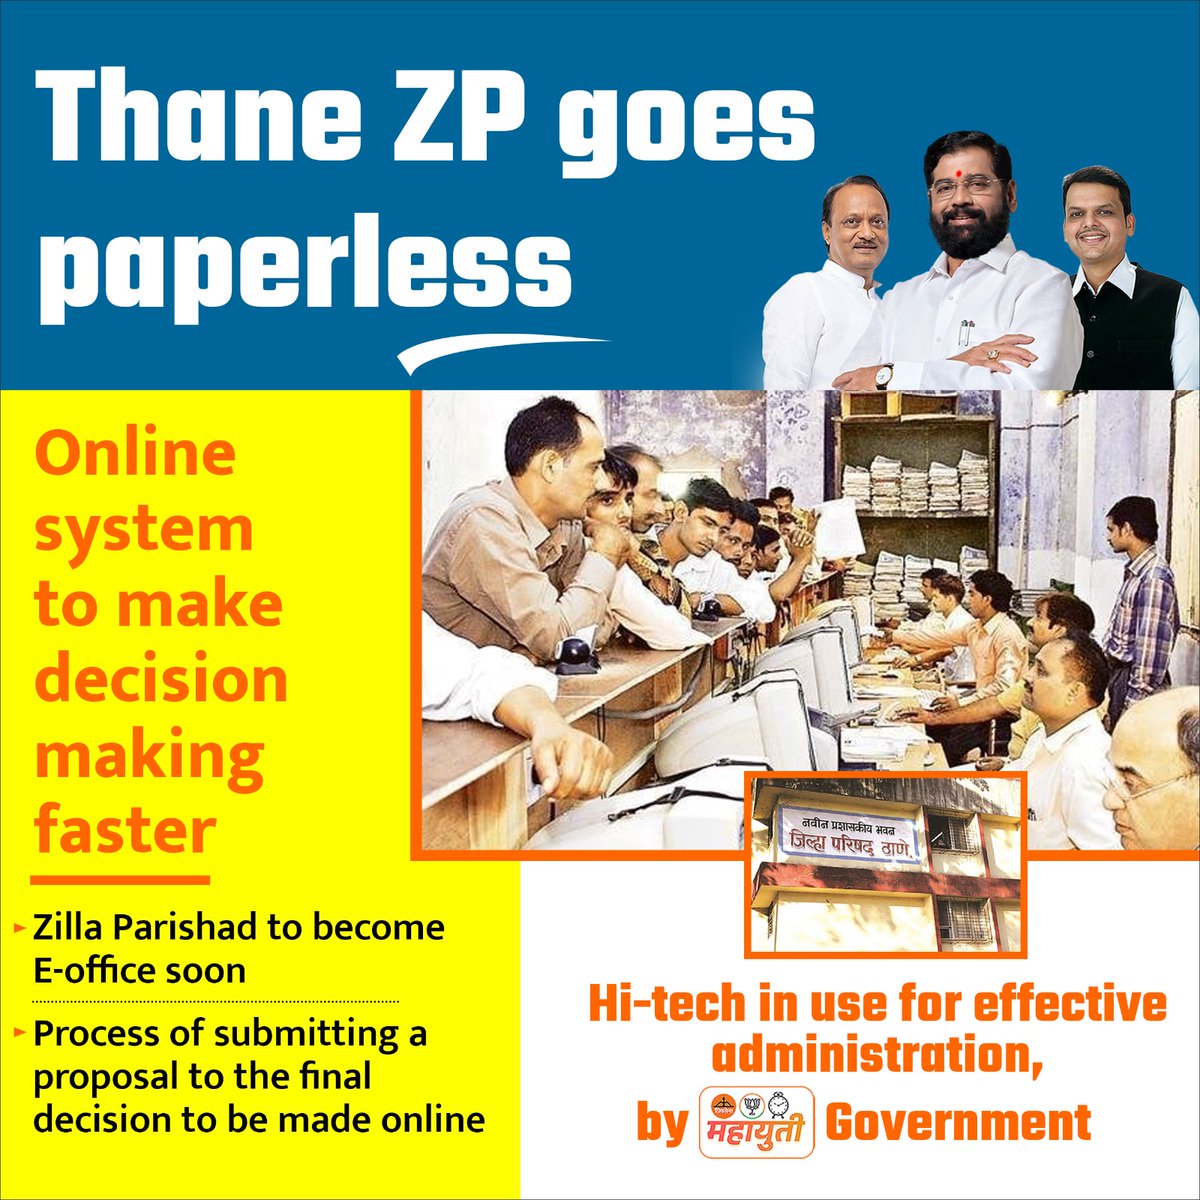 Exciting news as Thane ZP moves closer to becoming an E-office! The online proposal submission process will usher in a new era of accessibility and convenience. #ZillaParishad